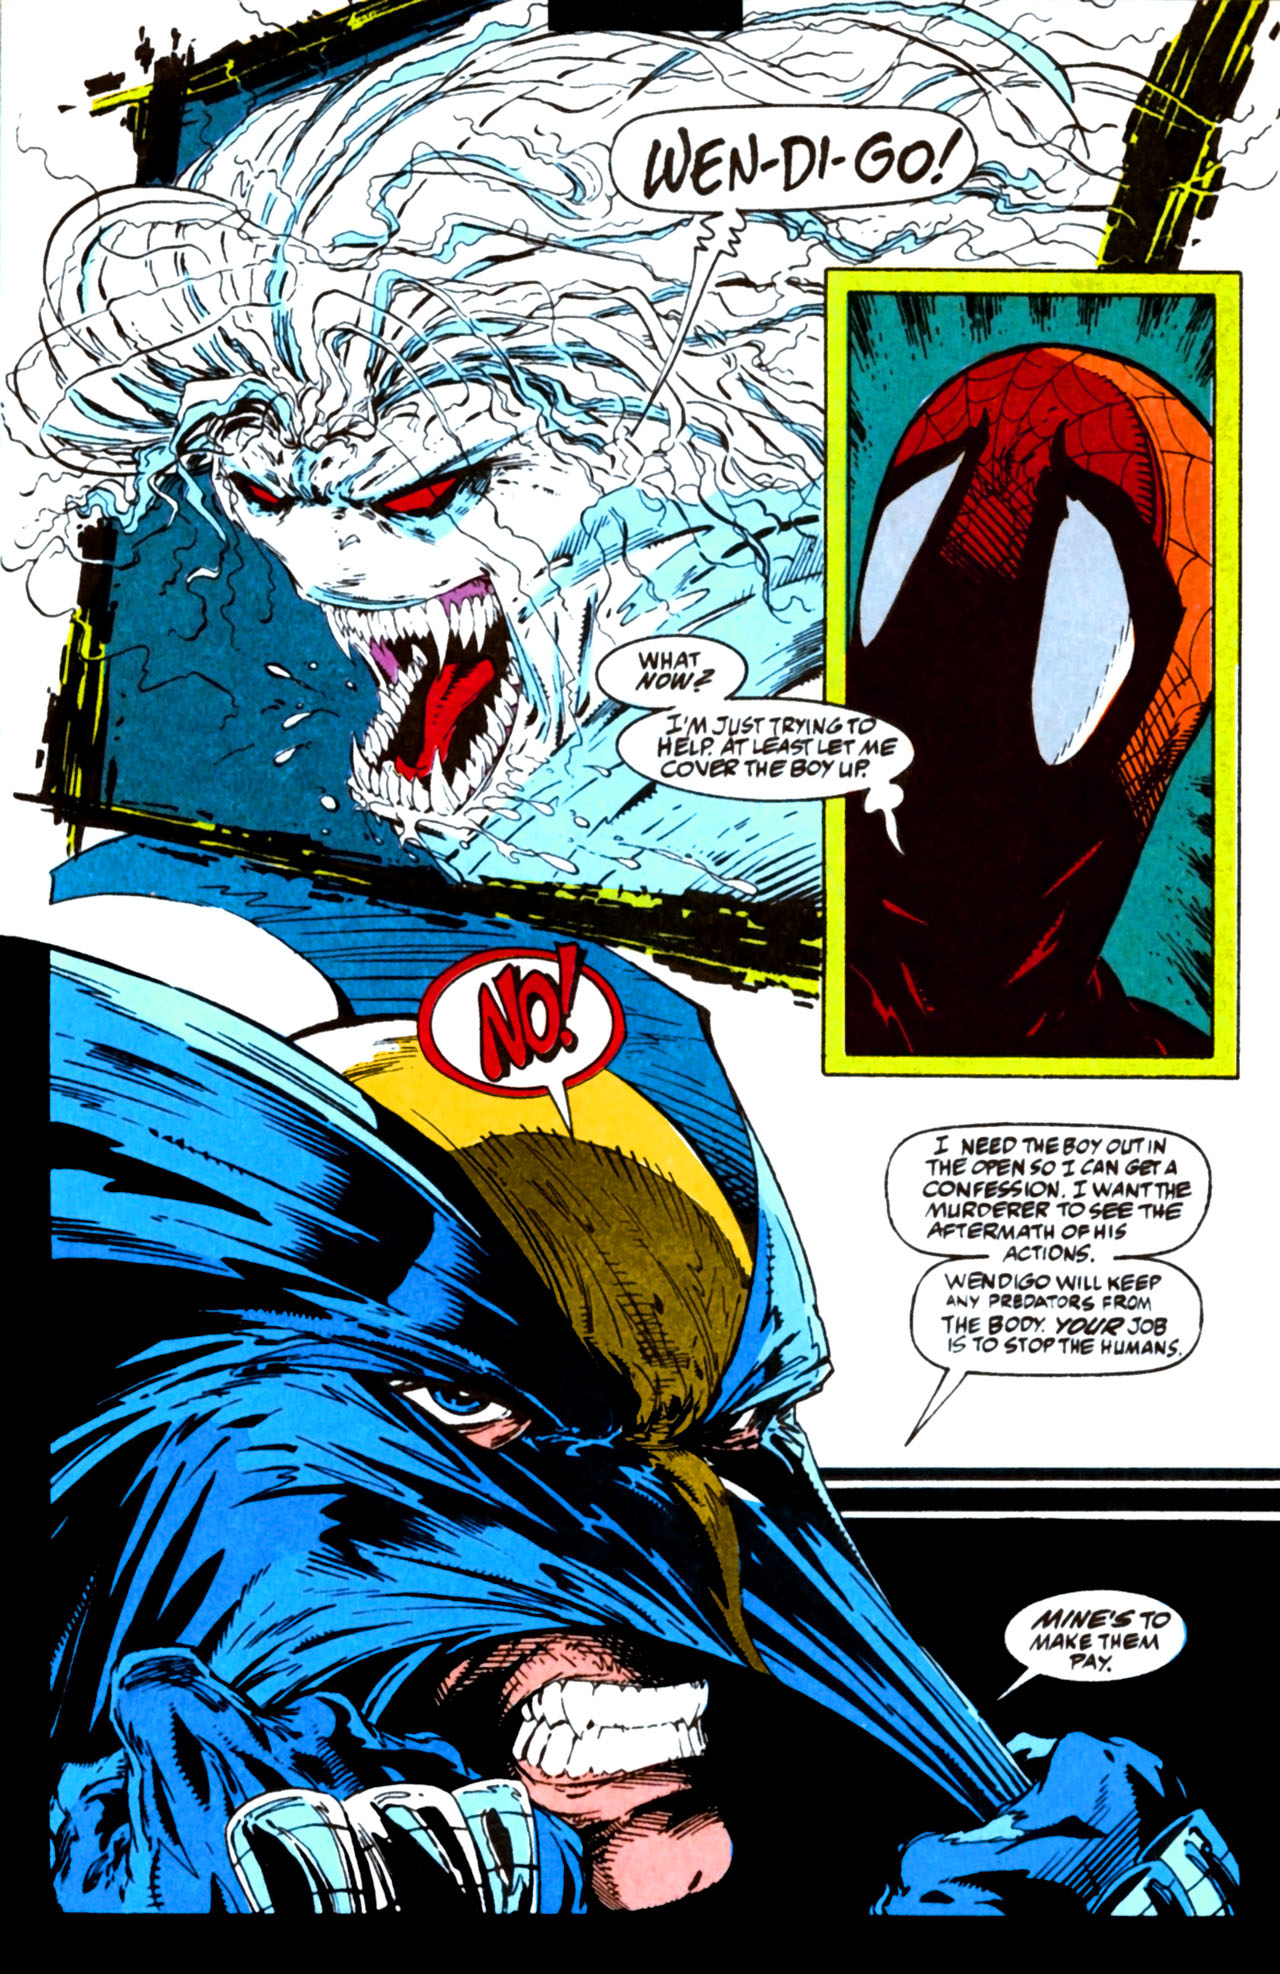 Spider-Man (1990) 12_-_Perceptions_Part_5_of_5 Page 5